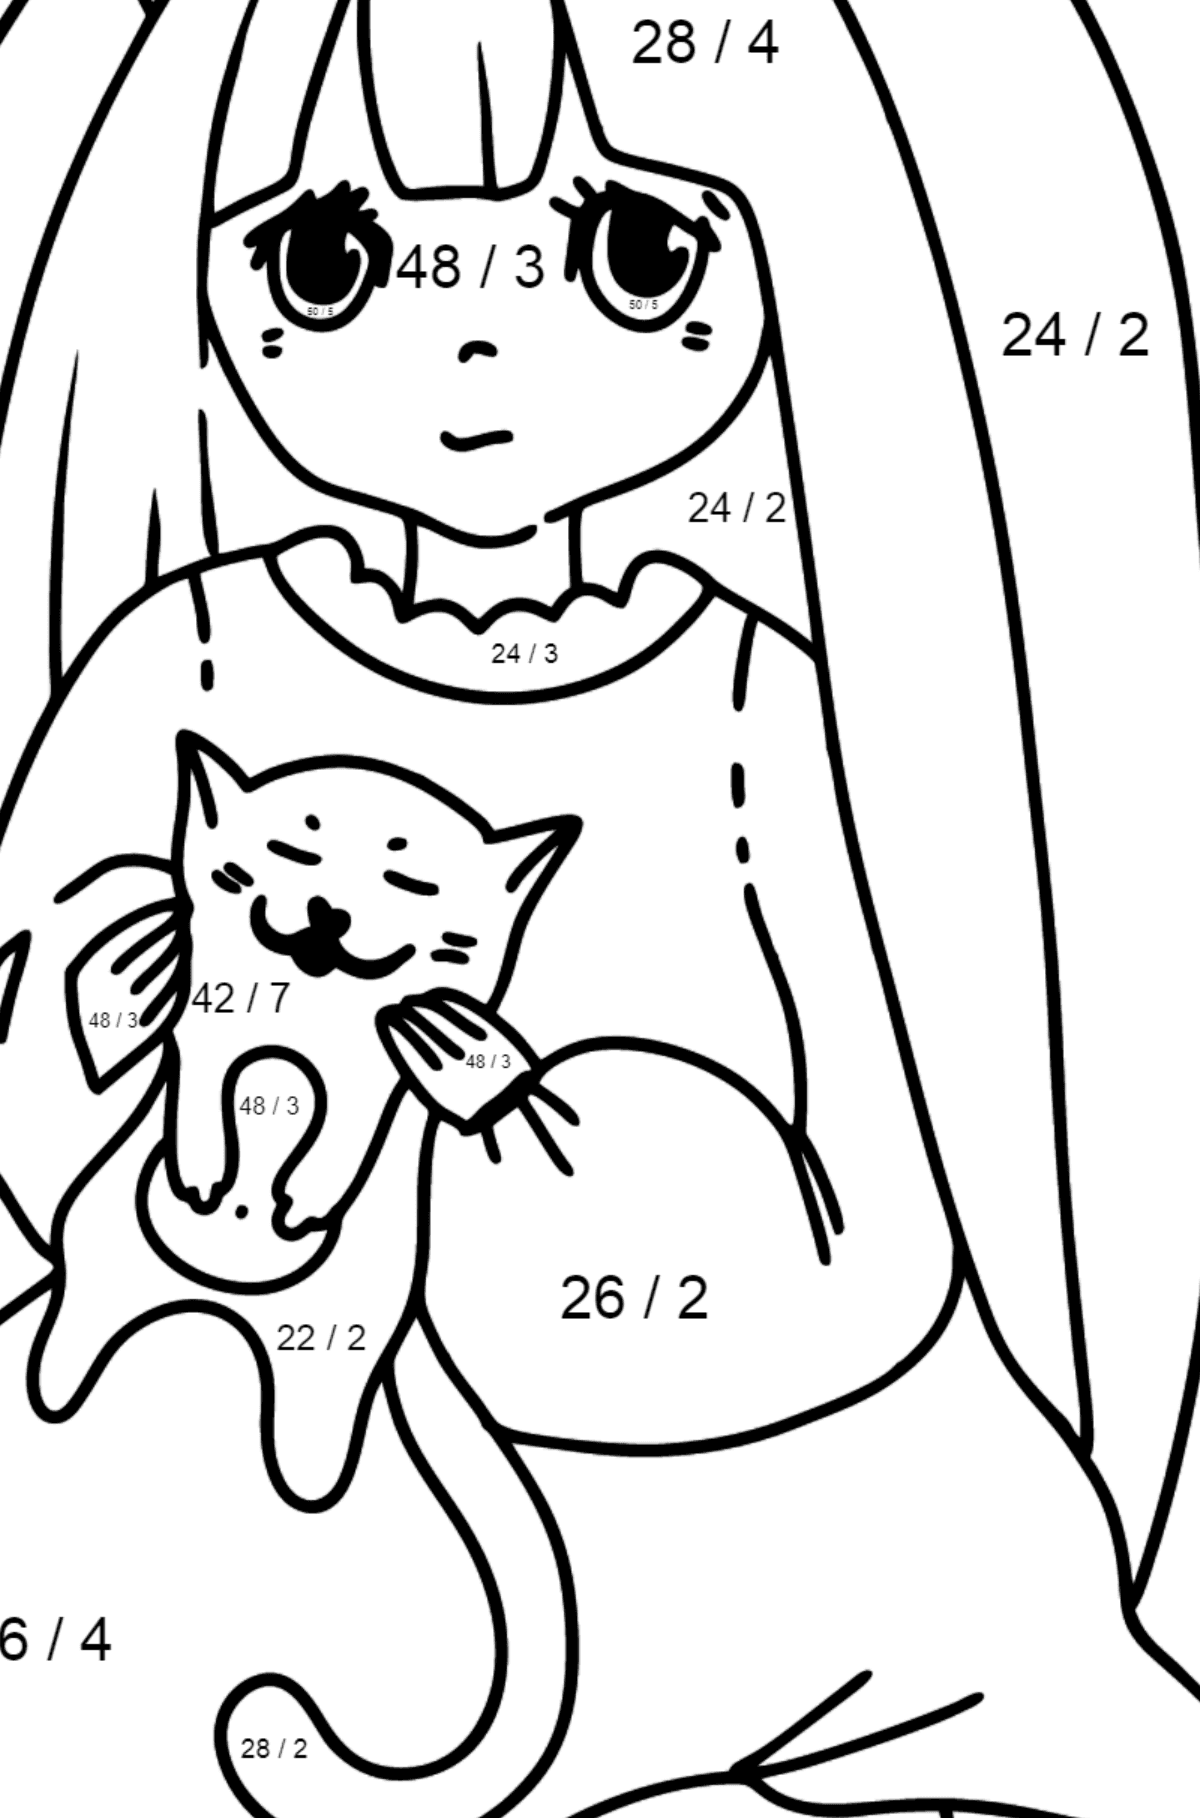 Anime Girl Playing with Kitten coloring page - Math Coloring - Division for Kids